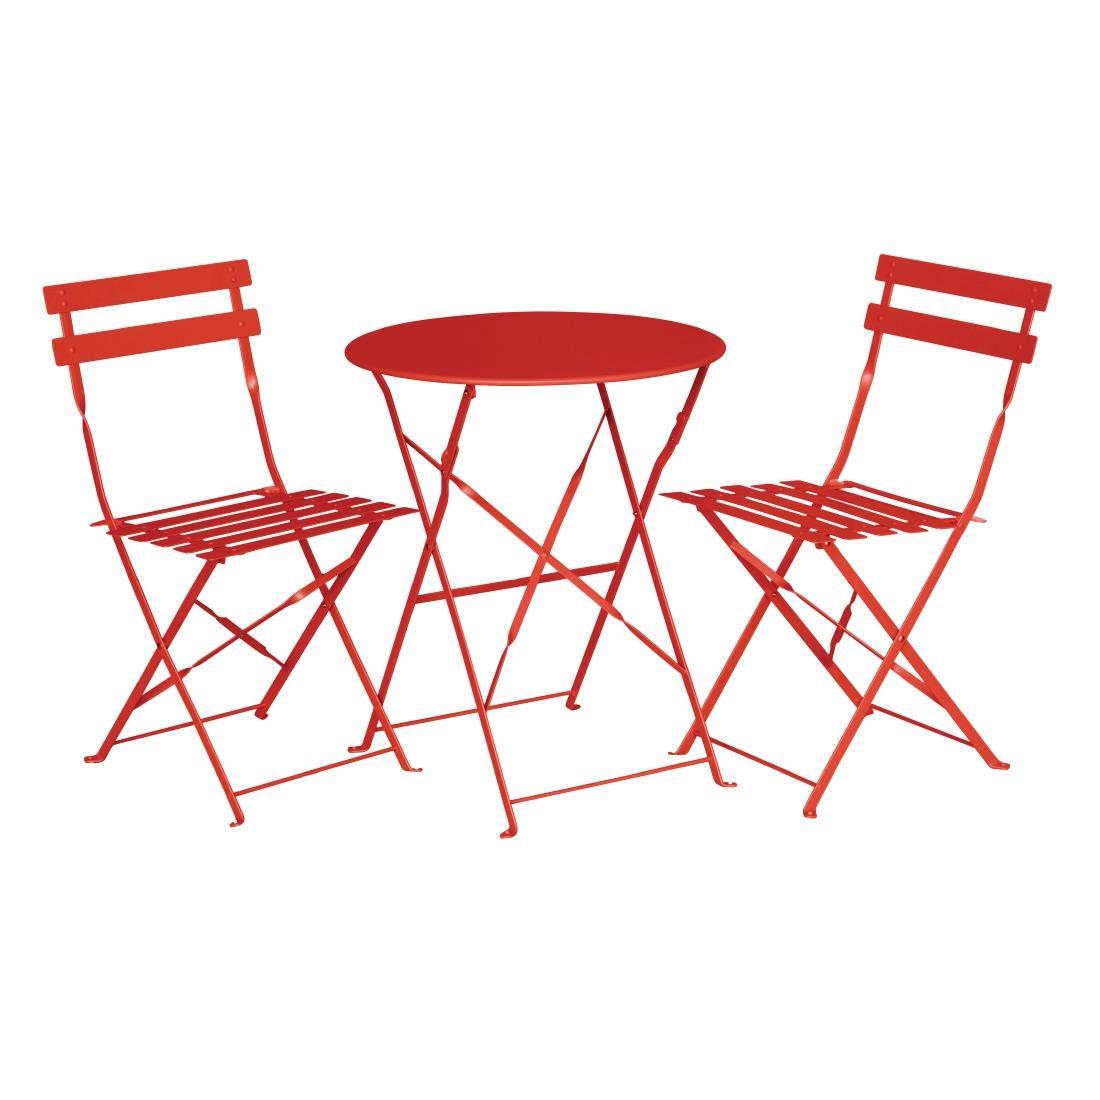 Bolero Red Pavement Style Steel Chairs (Pack of 2) - GH555  - 2